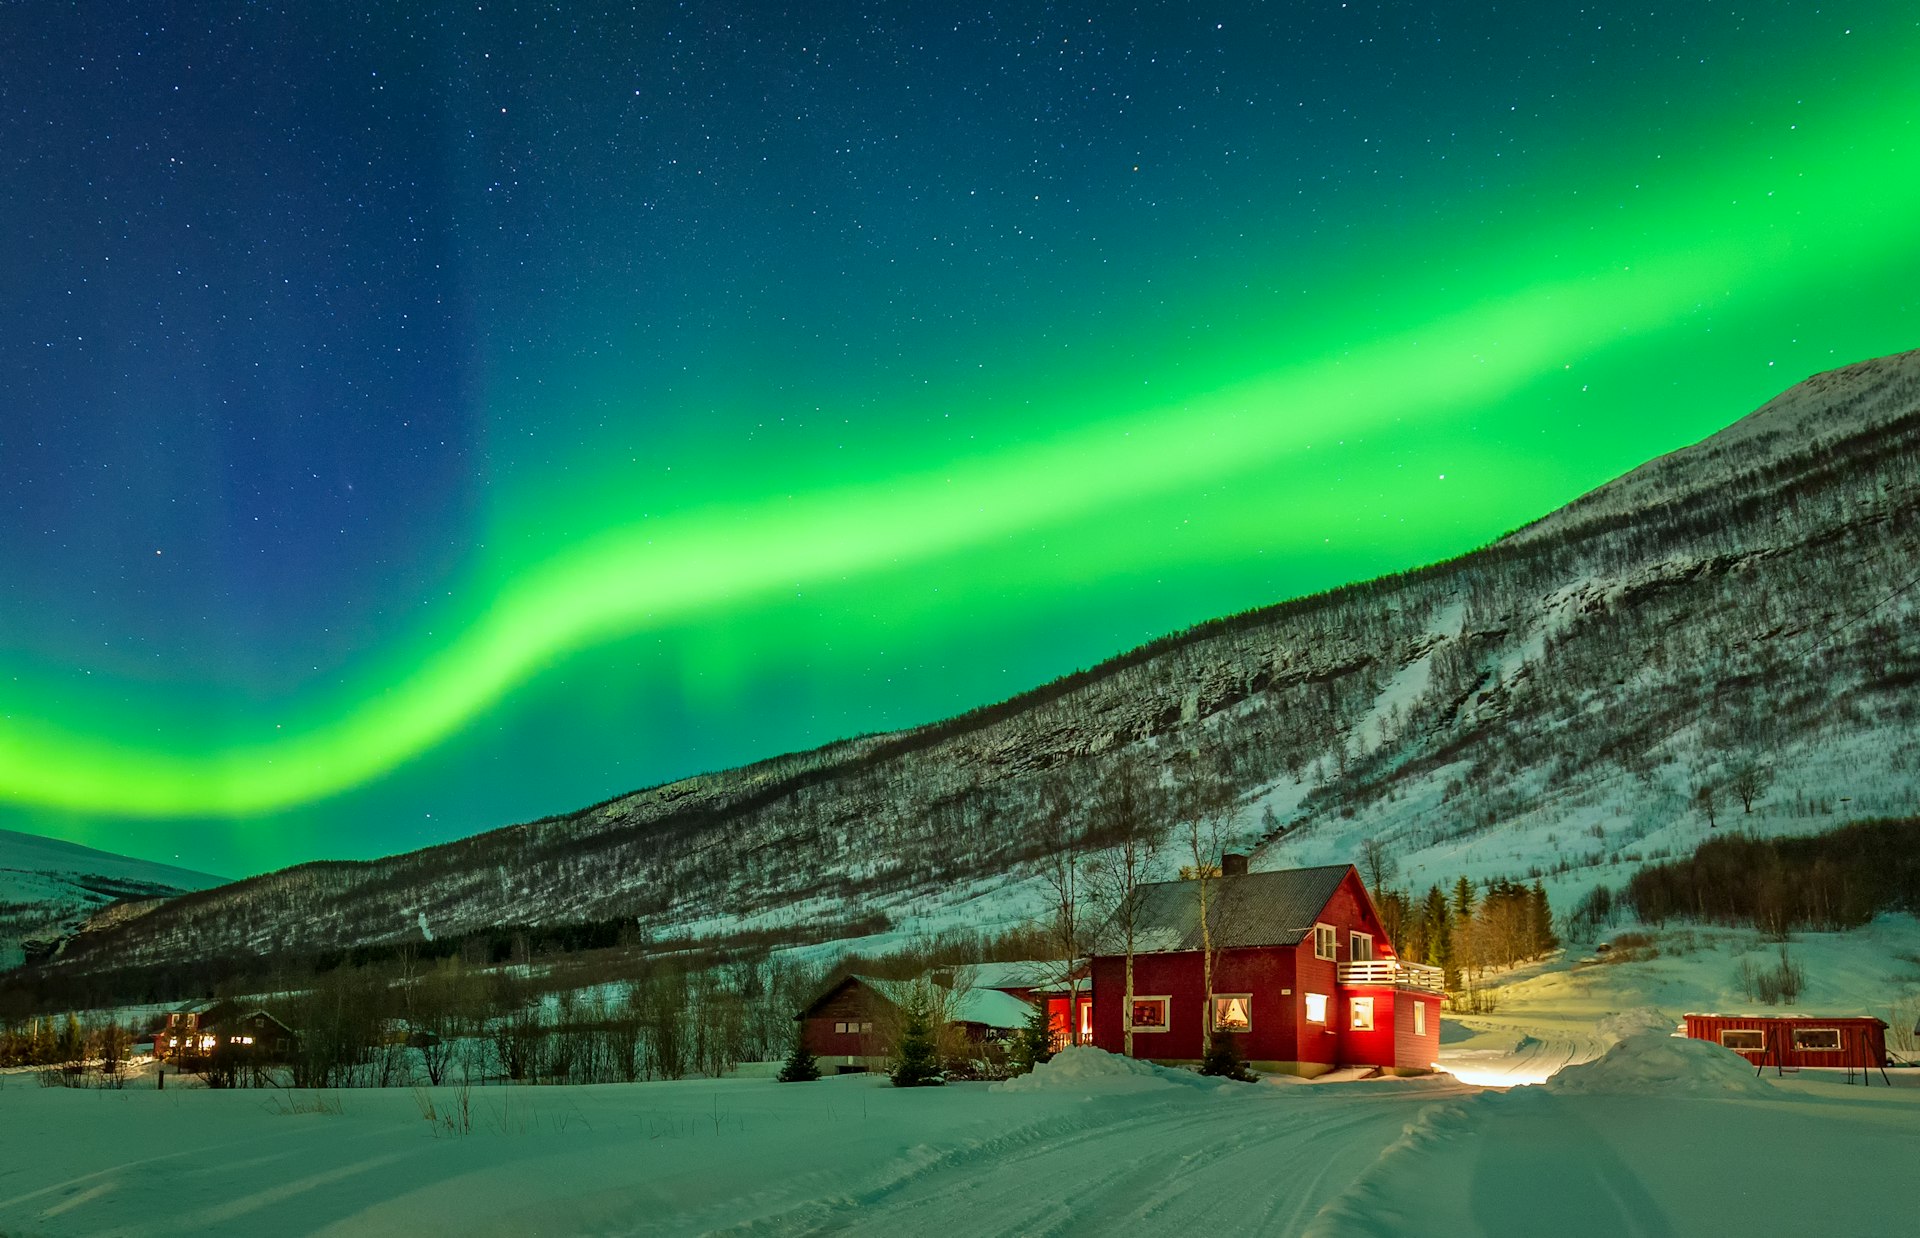 A streak of blue-green lights dance across the sky above an isolated red house in Norway